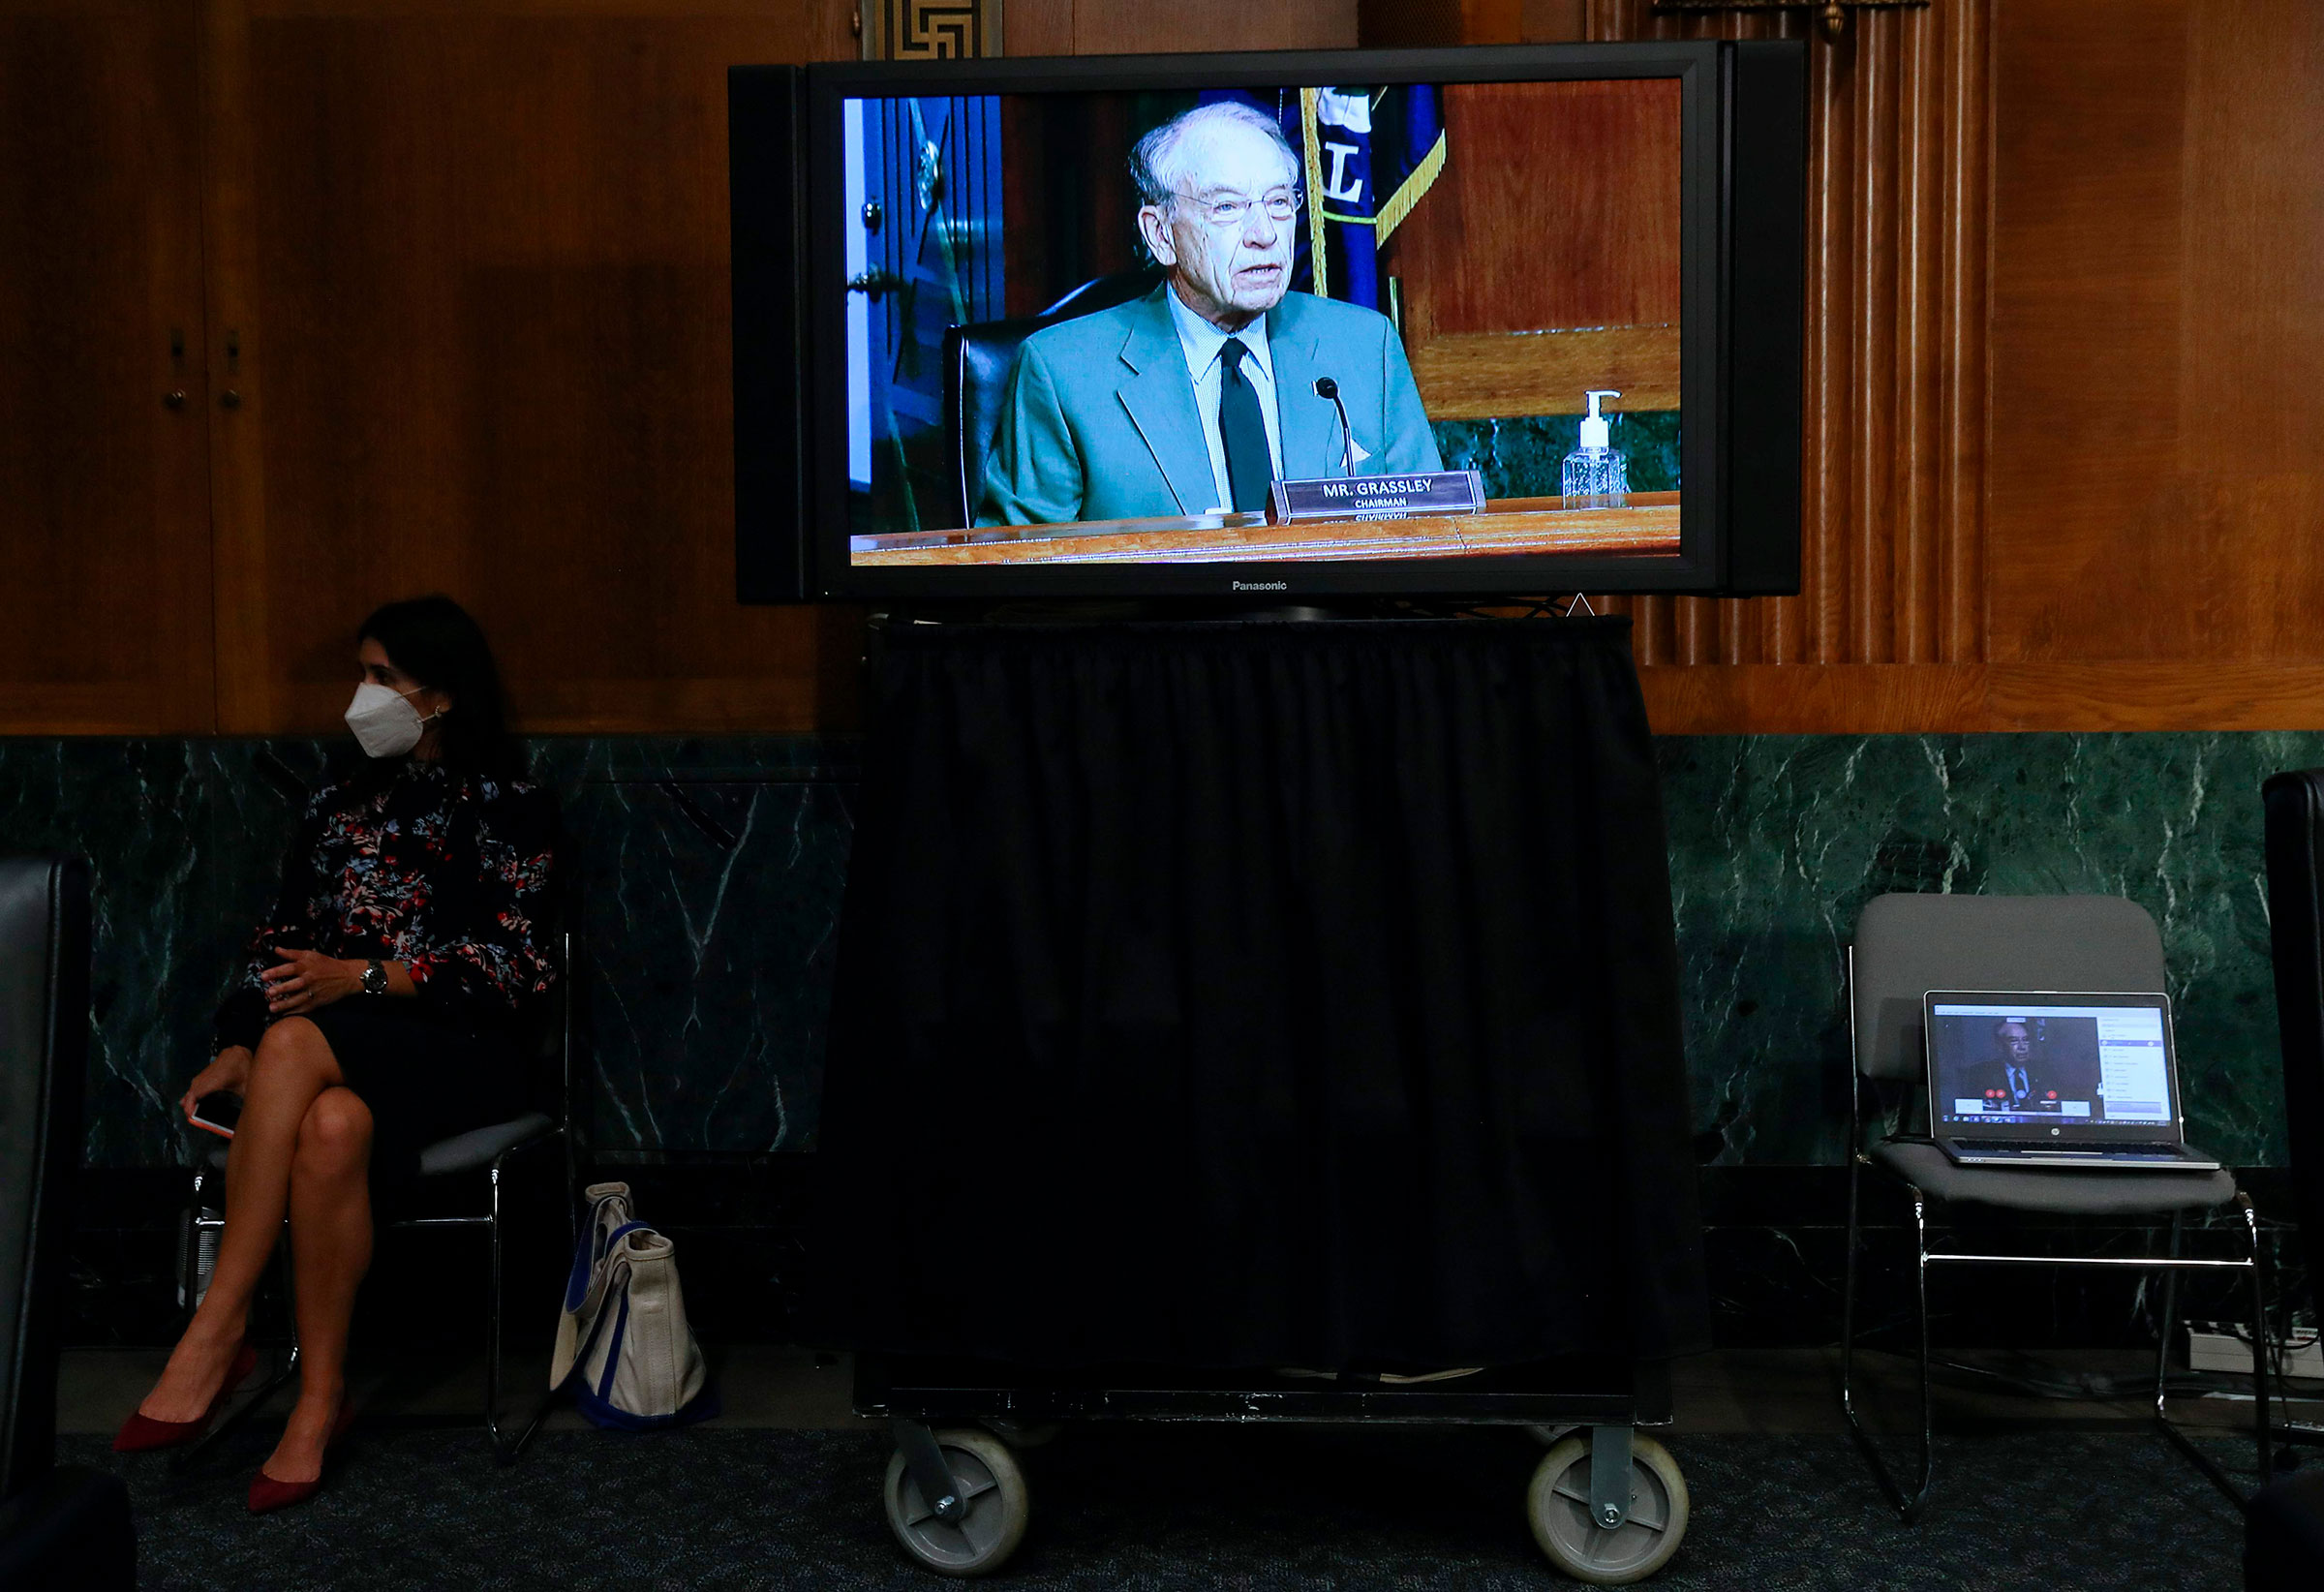 Committee Chairman Sen. Chuck Grassley is seen on a television monitor as he presides during a Senate Finance Committee hearing on Capitol Hill on June 9, 2020.